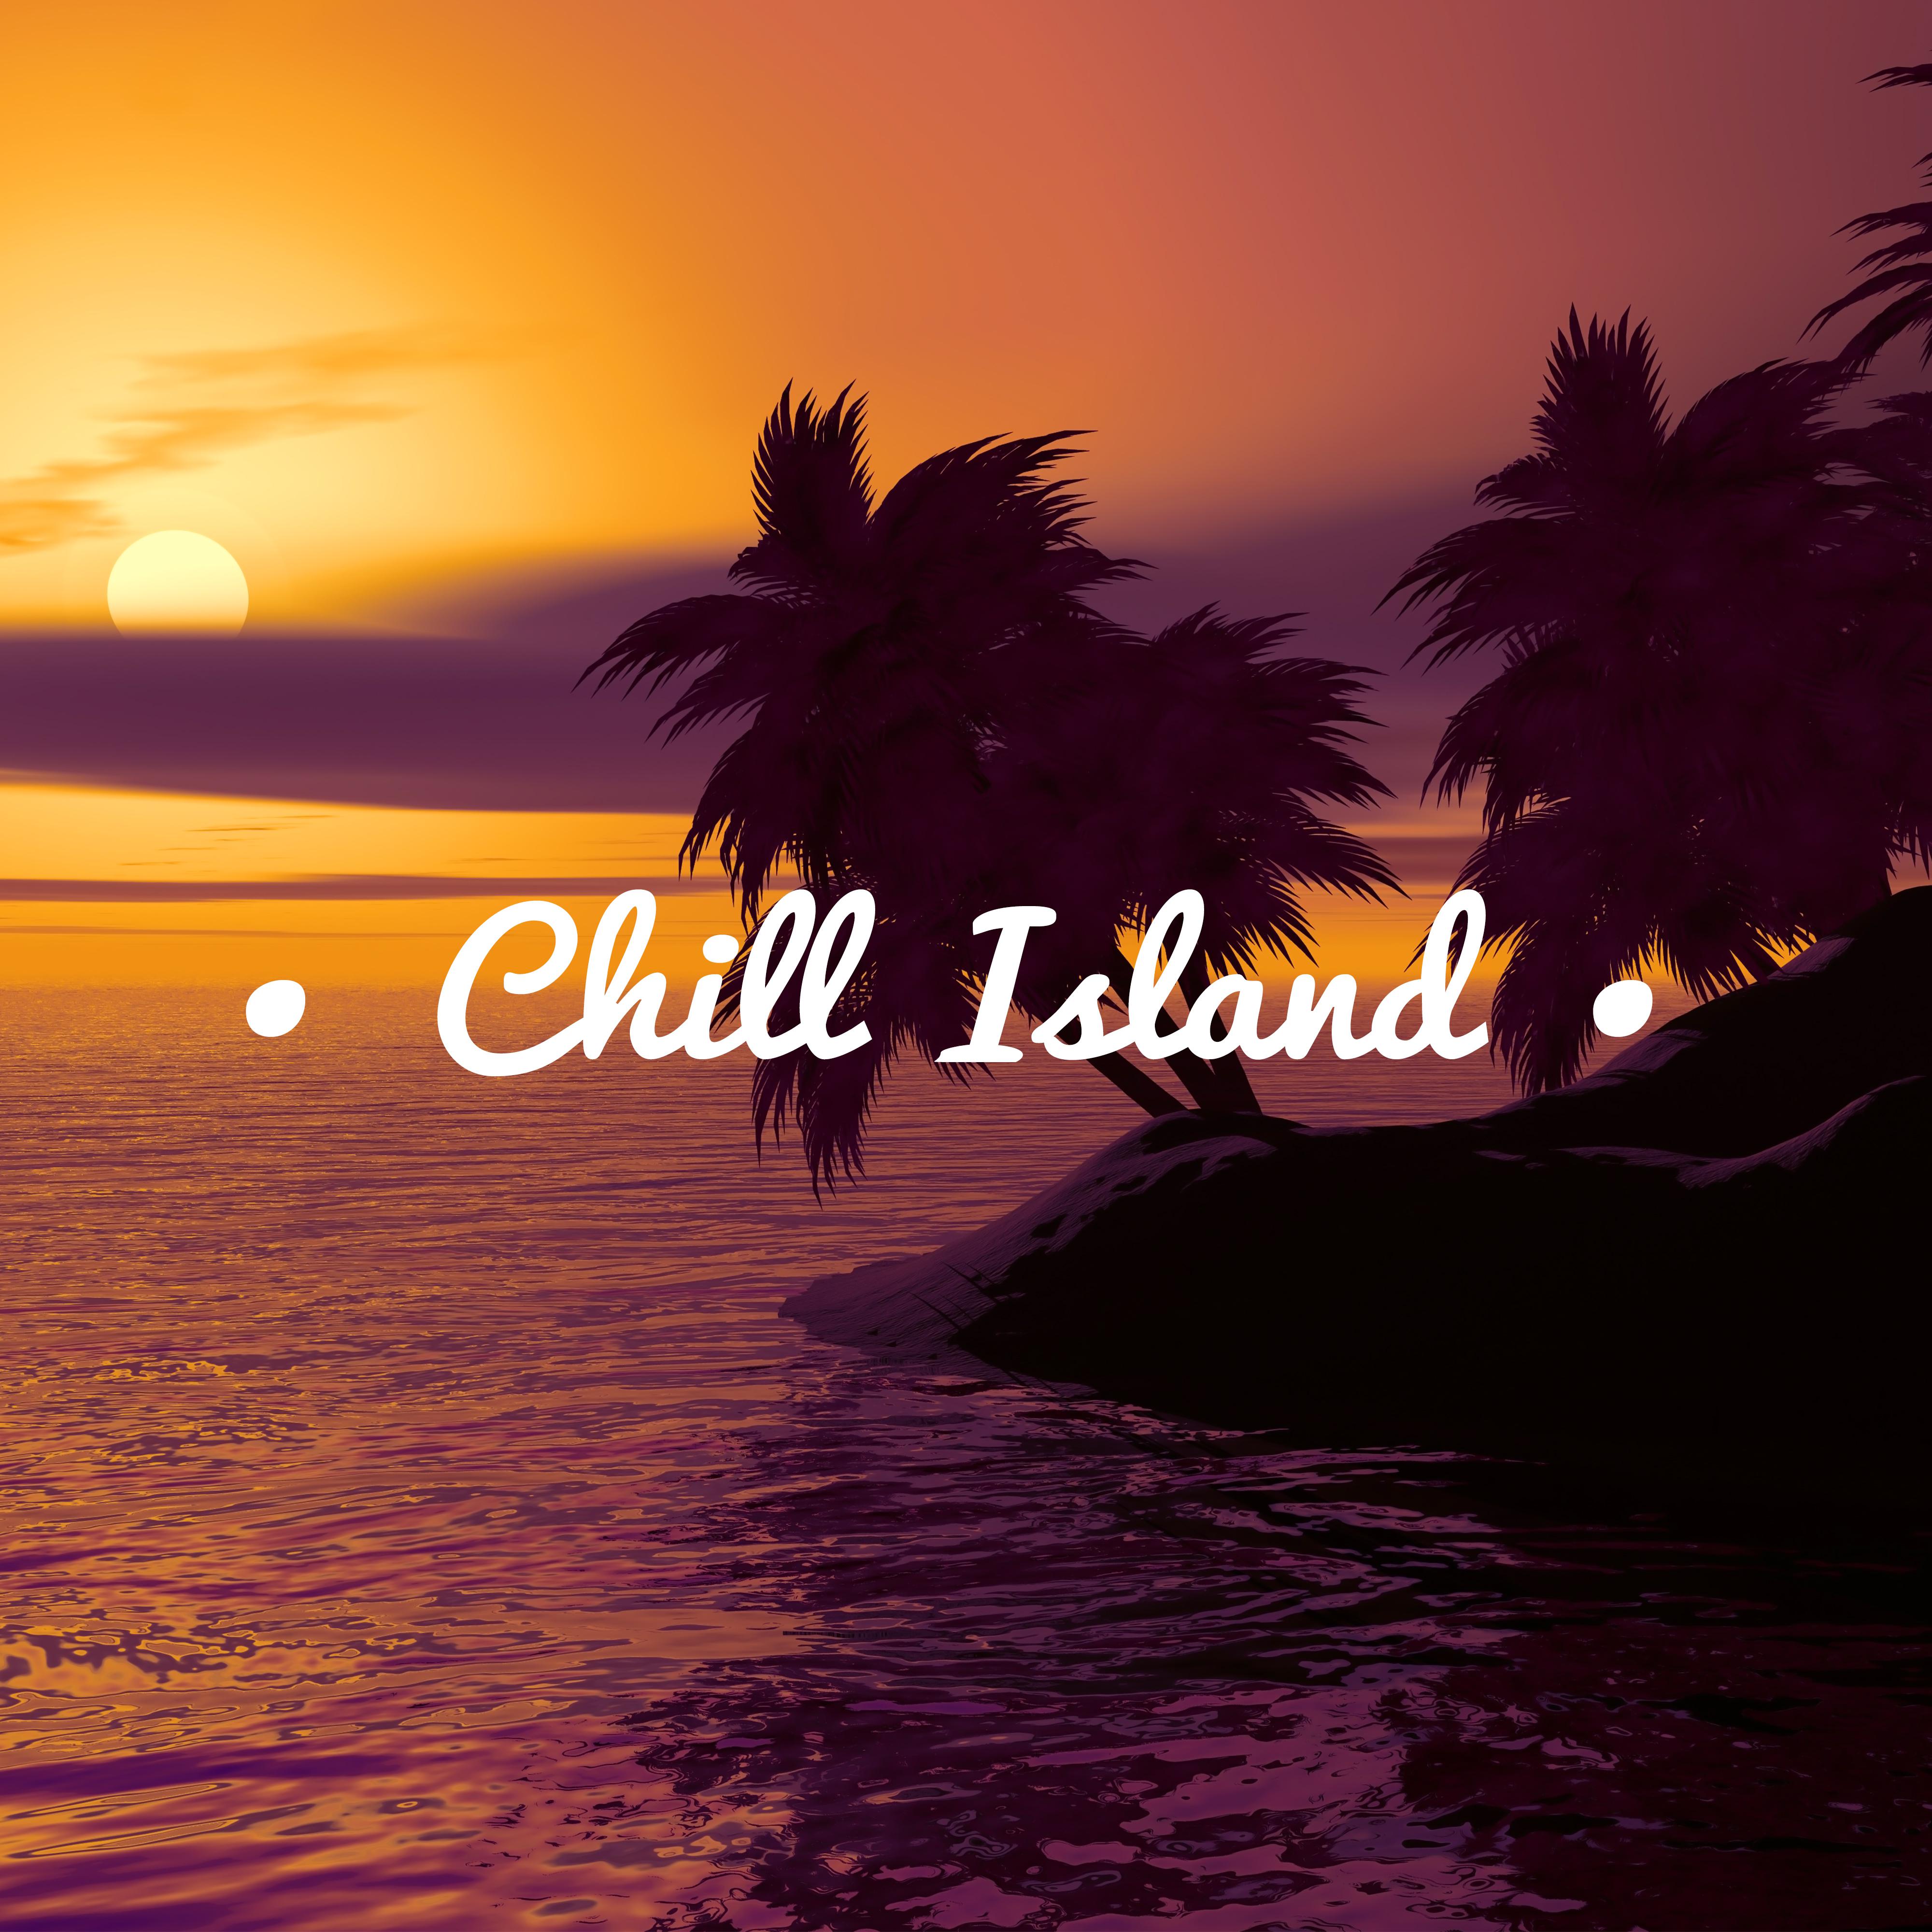 Chill Island – Beach Music, Tropical Lounge Music, Summer Vibes, Calm Down, Sunbed Chill